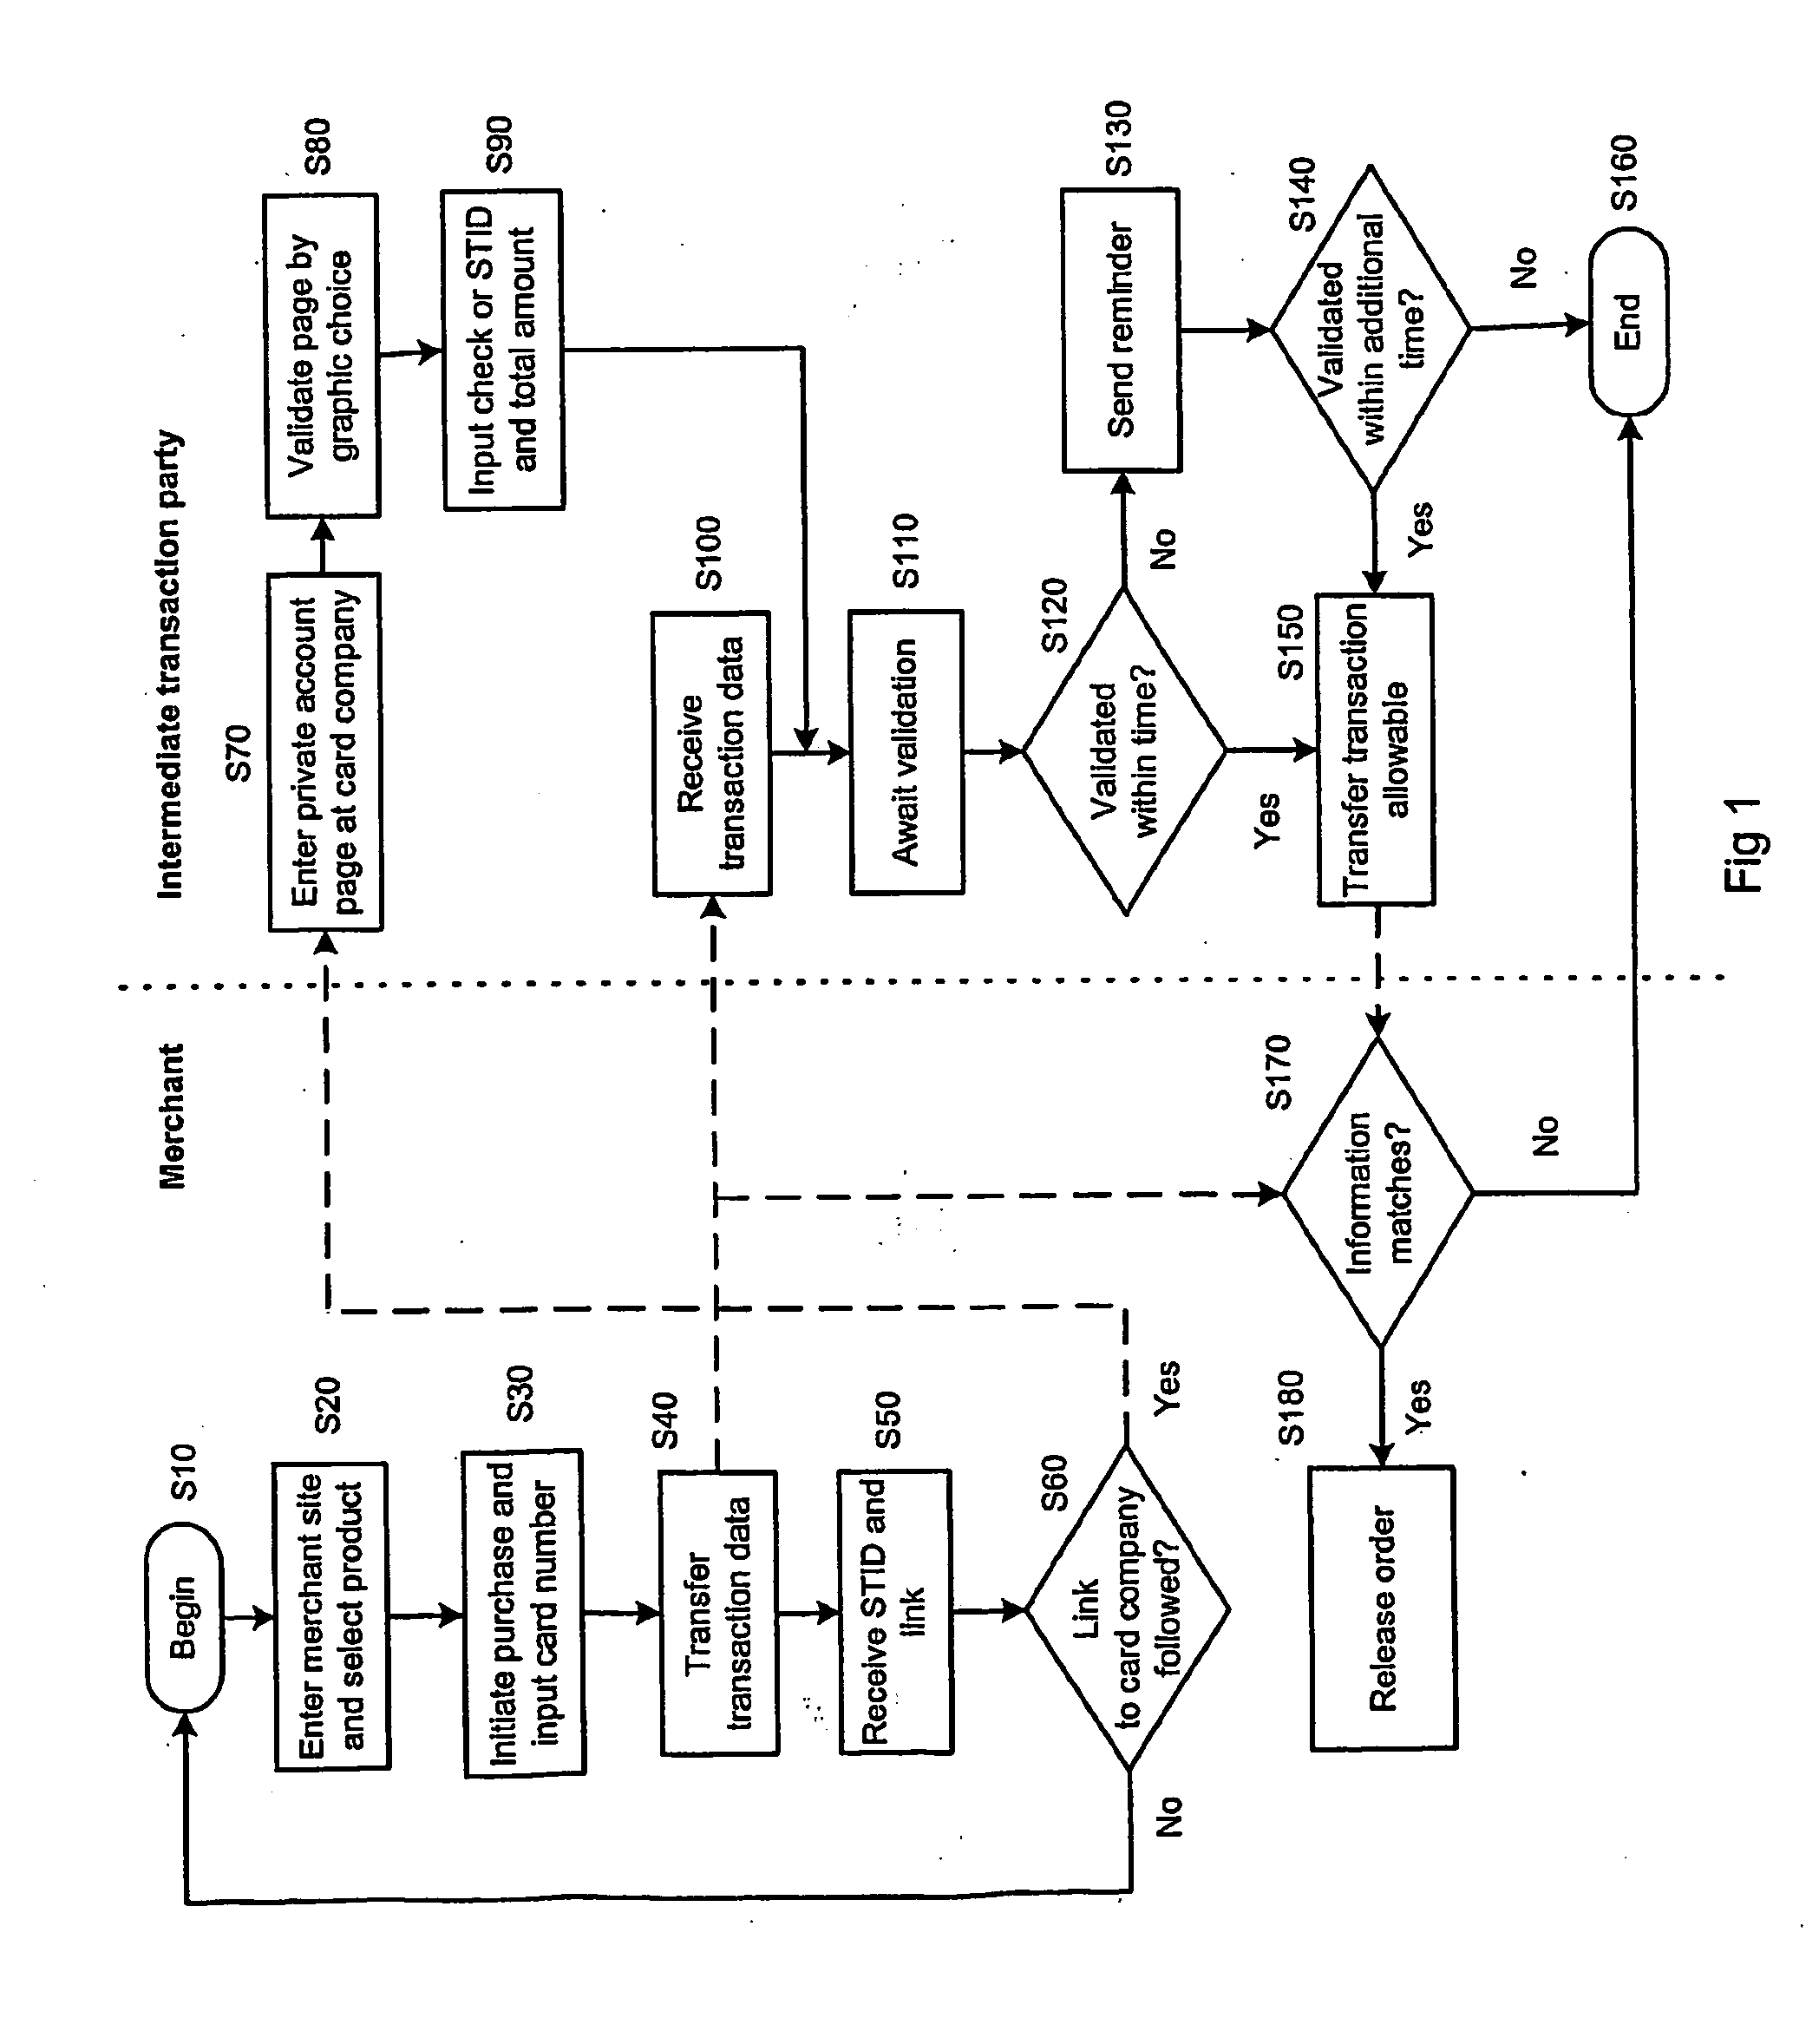 Apparatus and method for secure credit card processing infrastructure